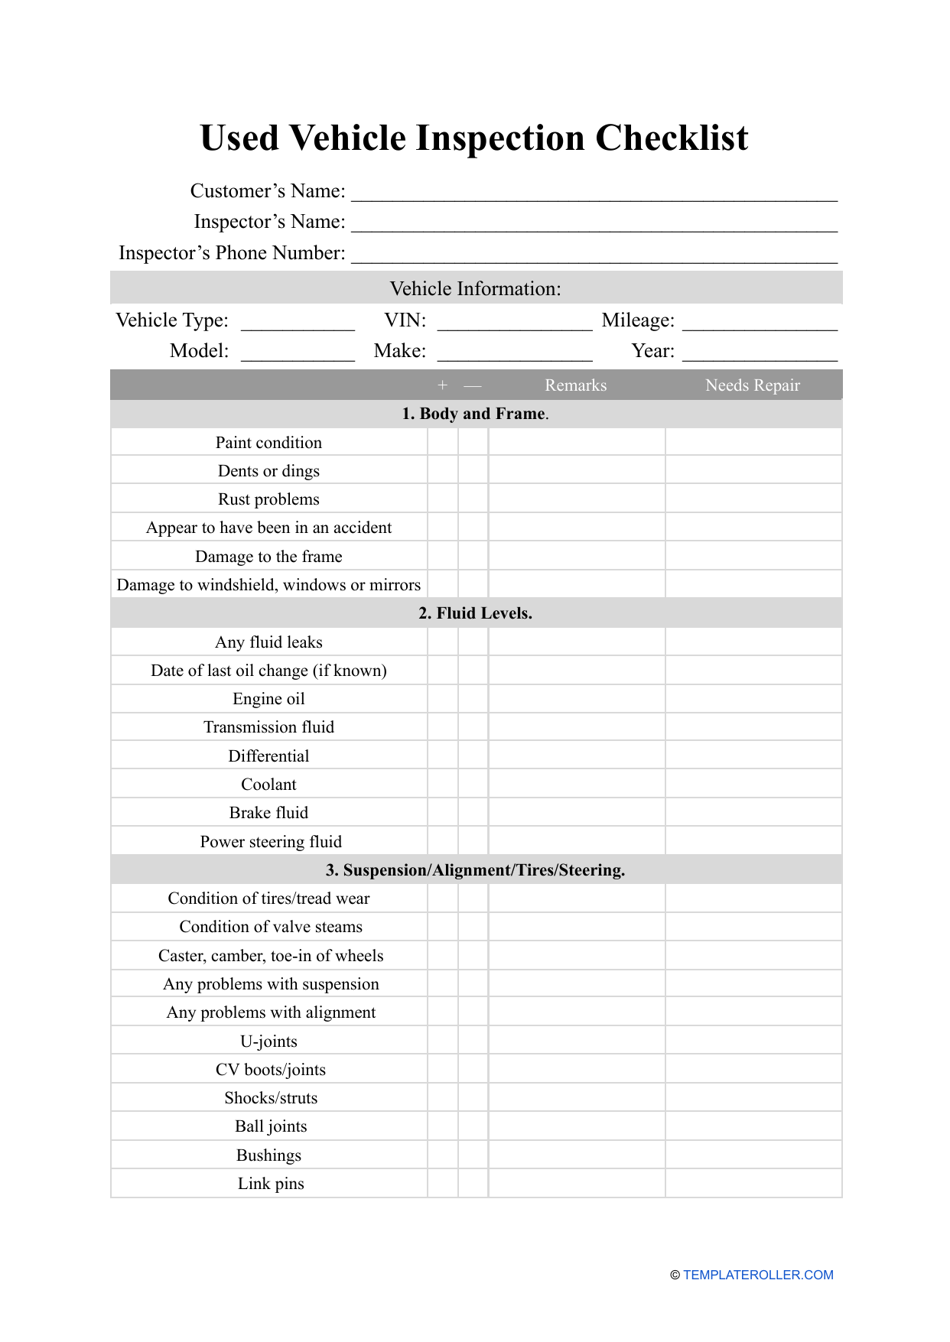 Used Vehicle Inspection Checklist Template - Preview Image